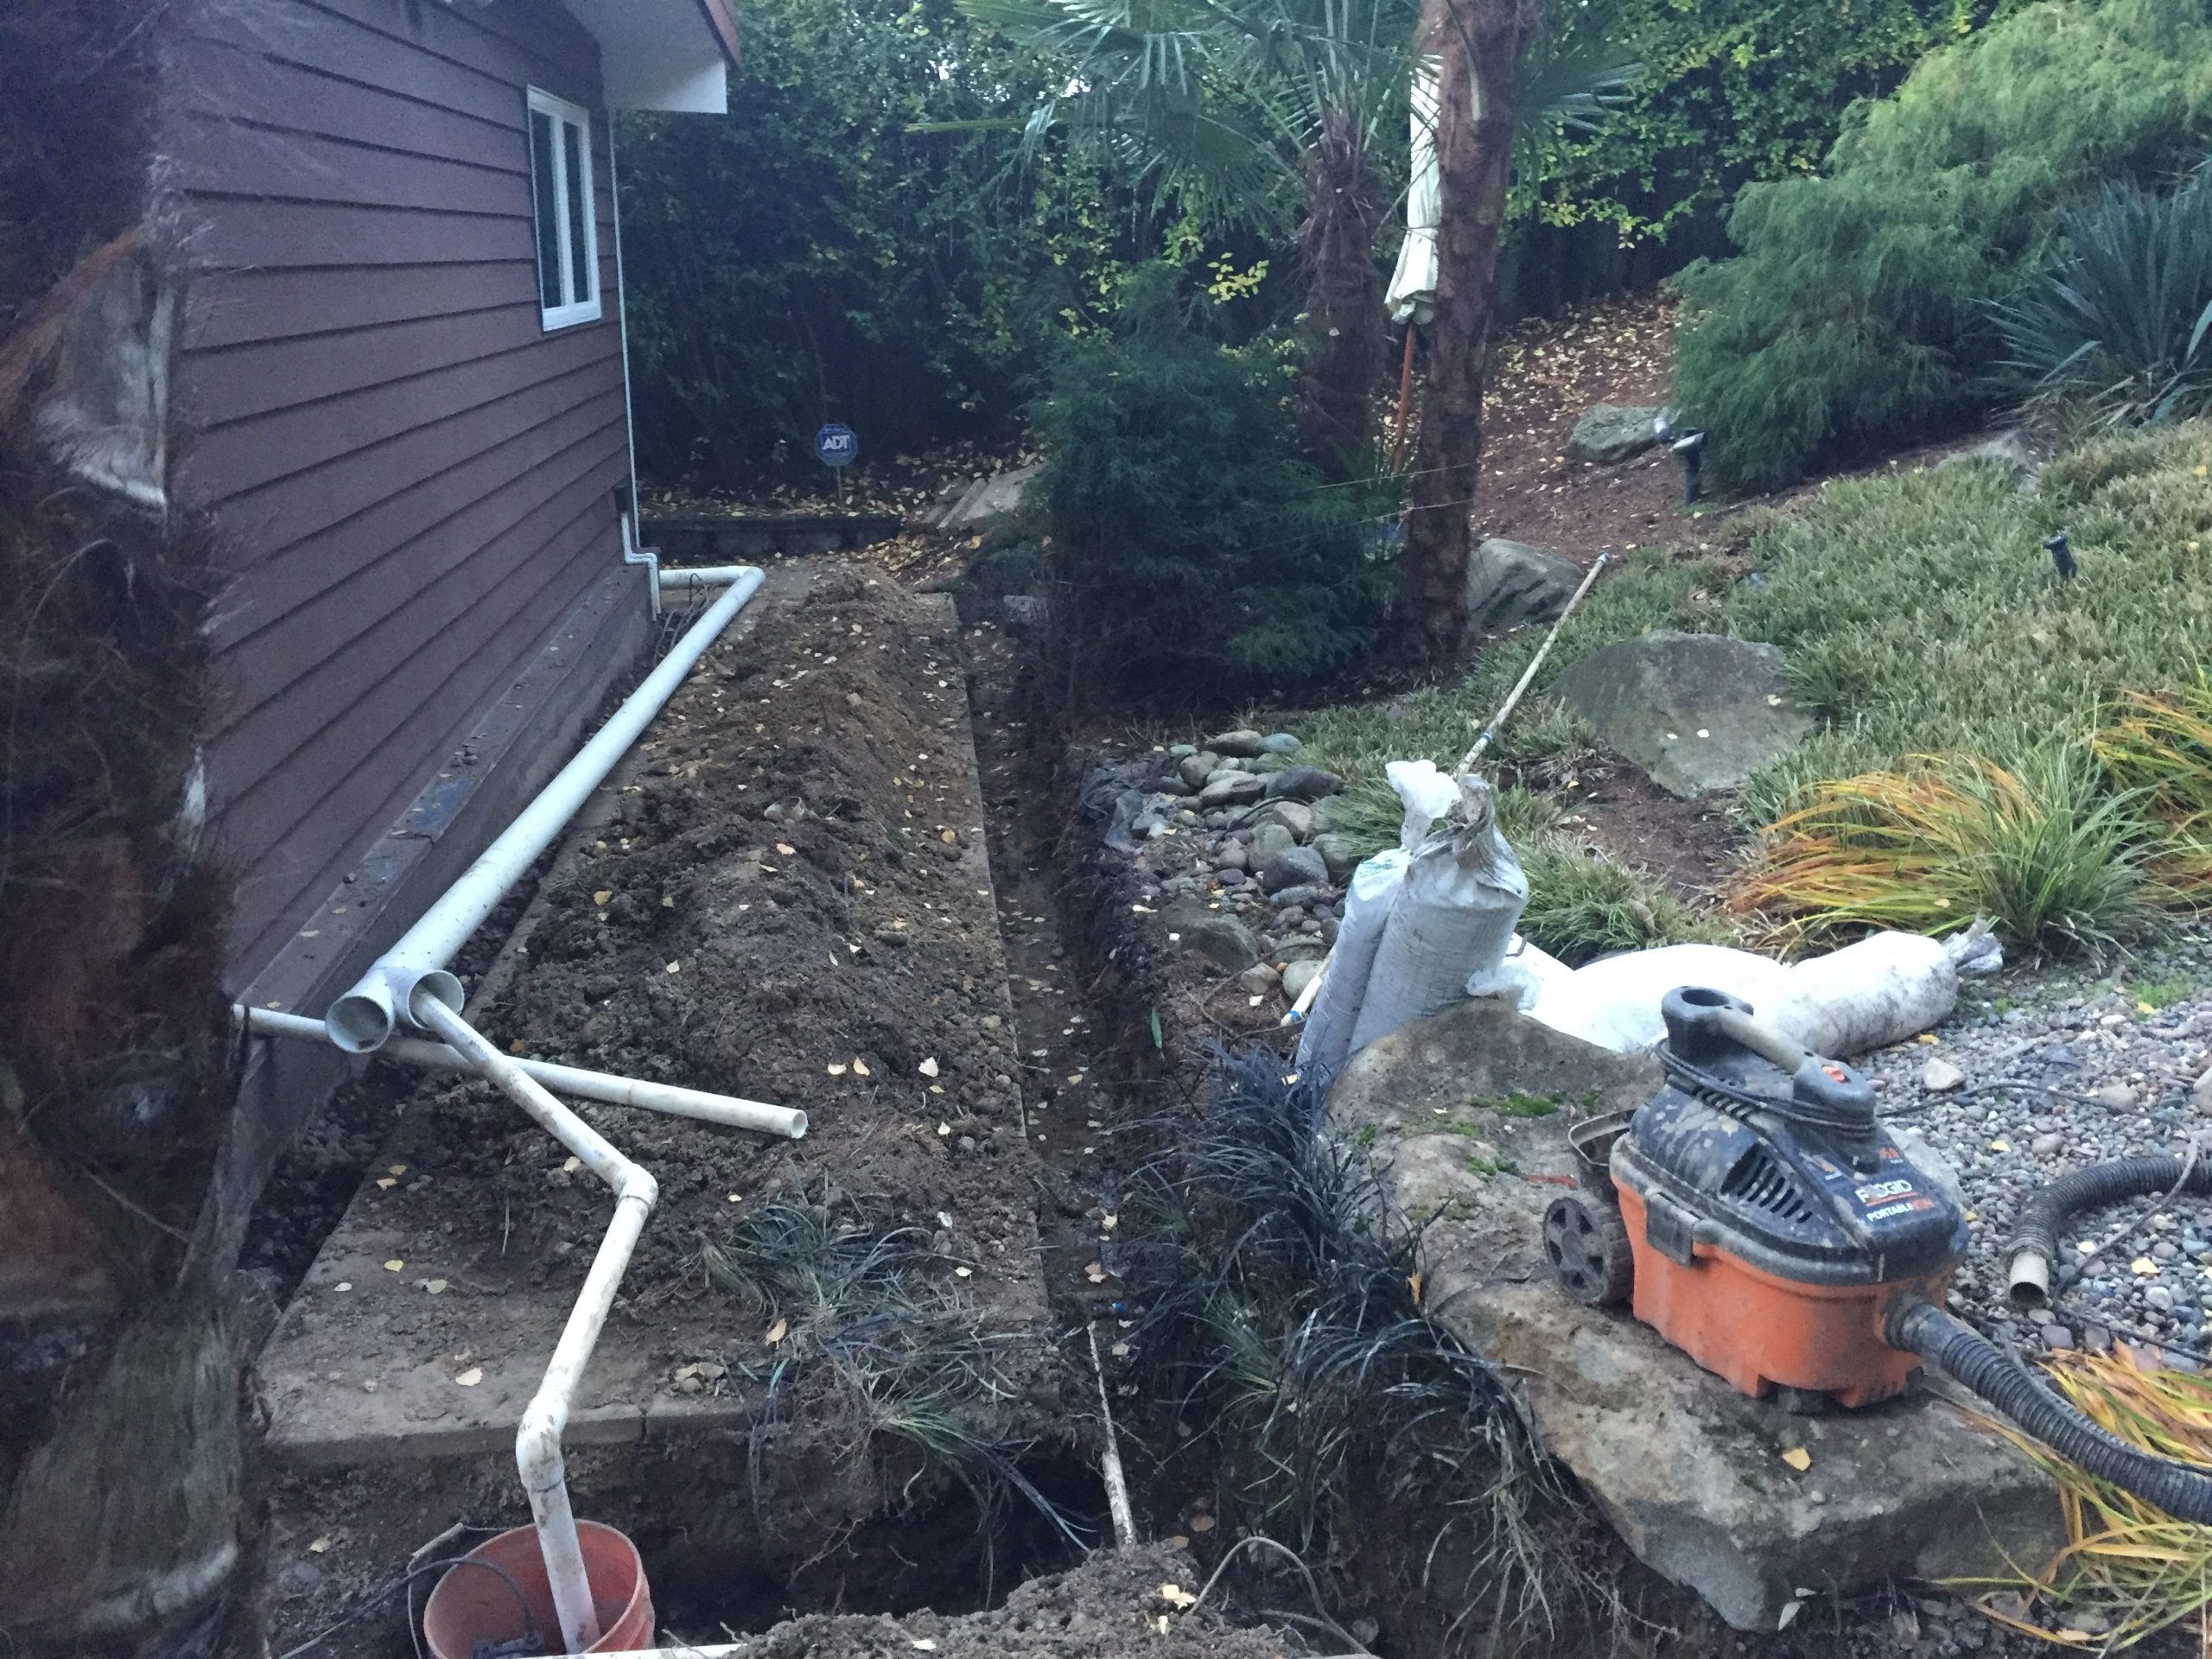 french drain under construction